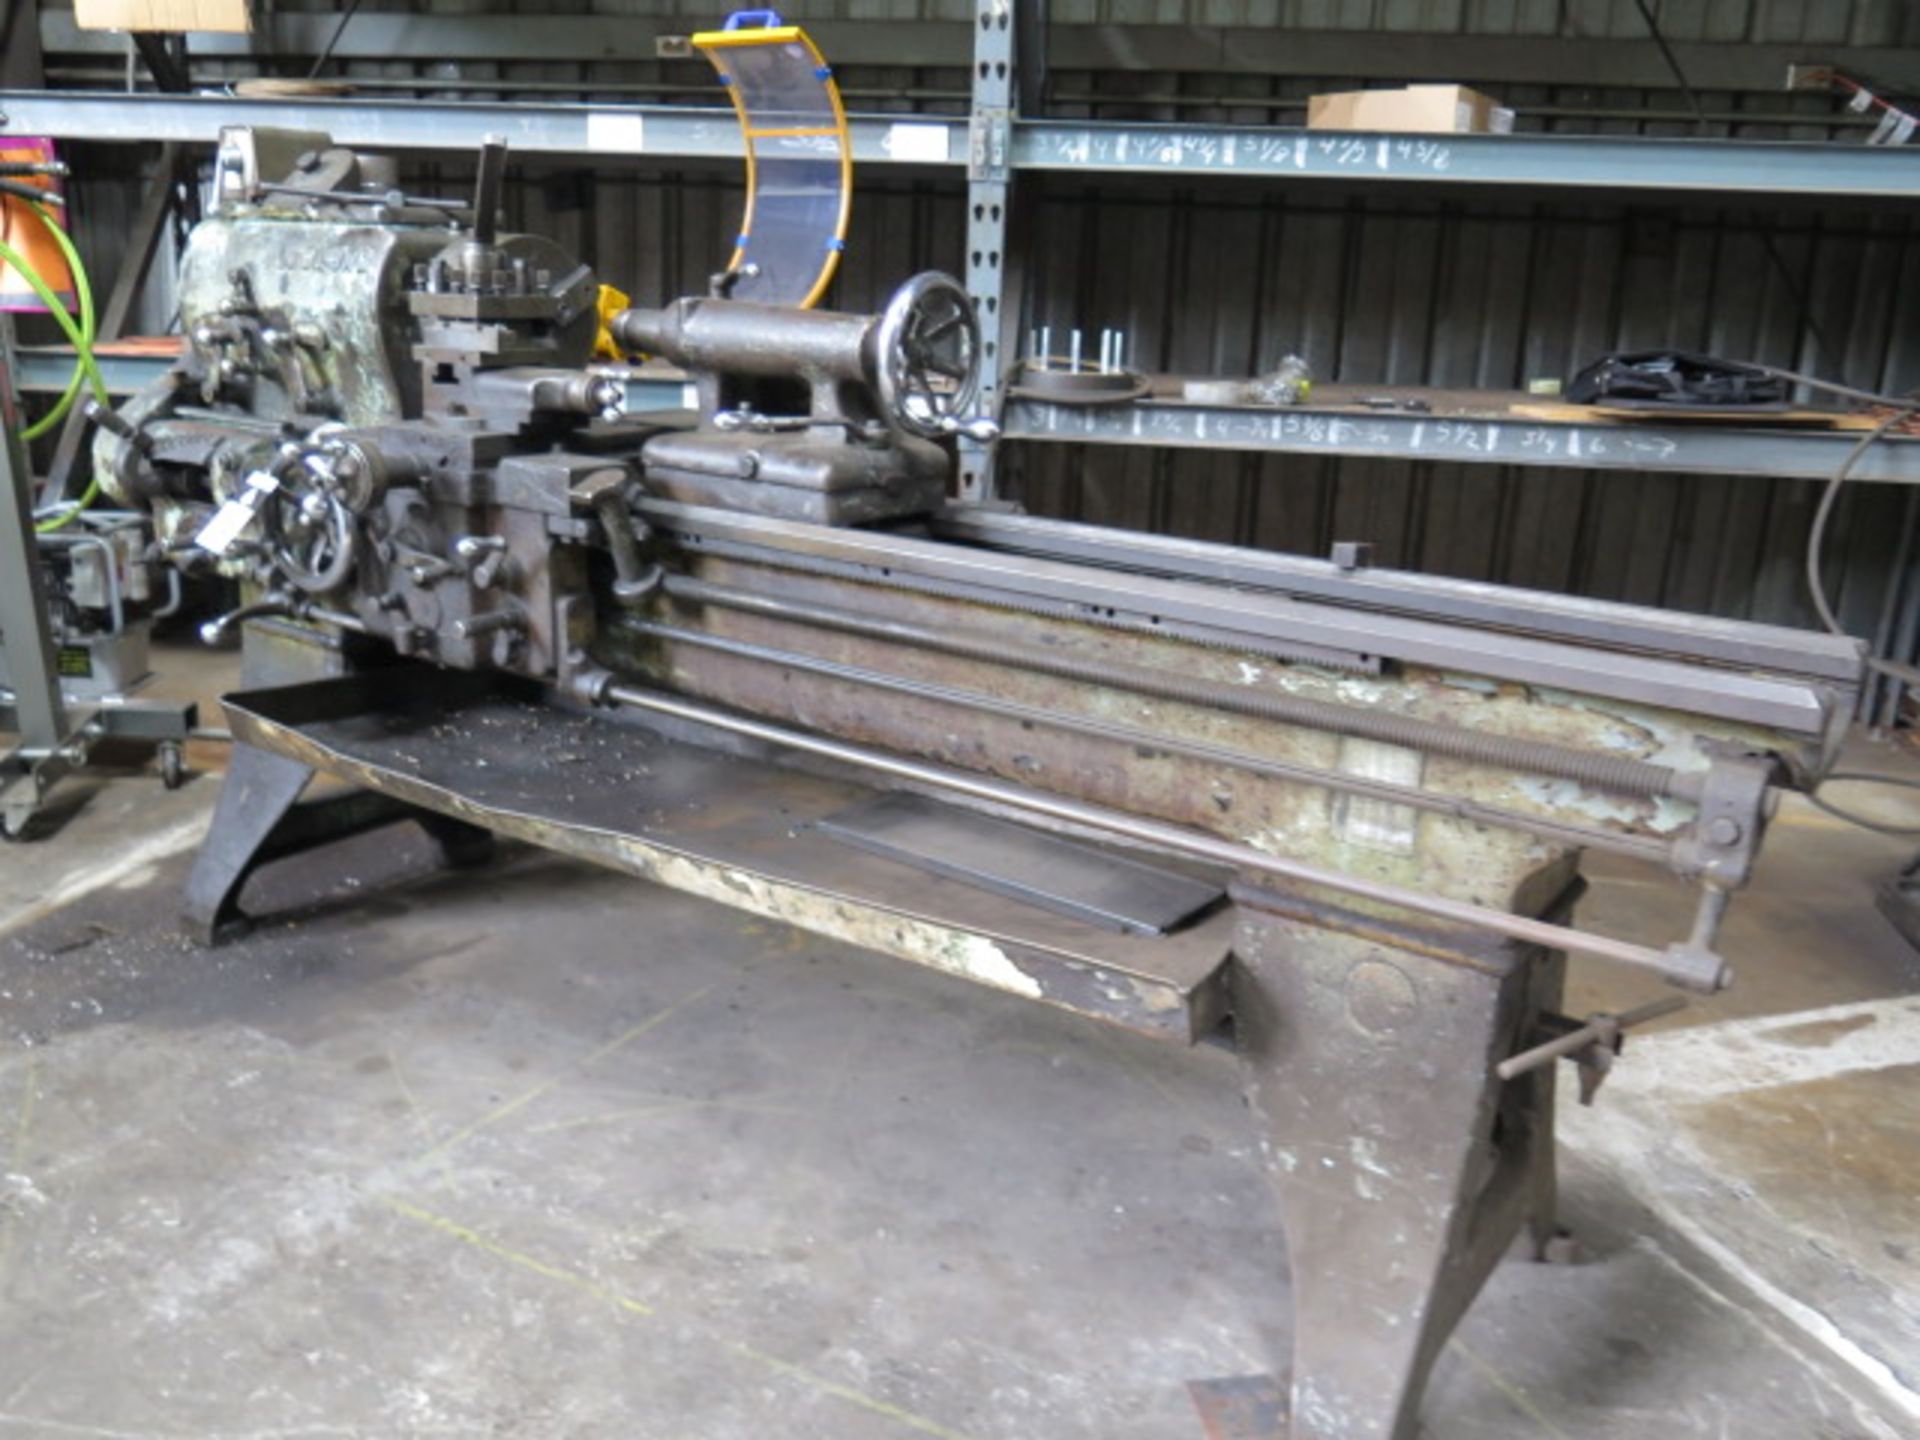 LeBlond 18” x 54” Lathe w/ 10-634 RPM, Inch Threading, Indexing Tool Post, 10” 3-Jaw, SOLD AS IS - Image 3 of 7